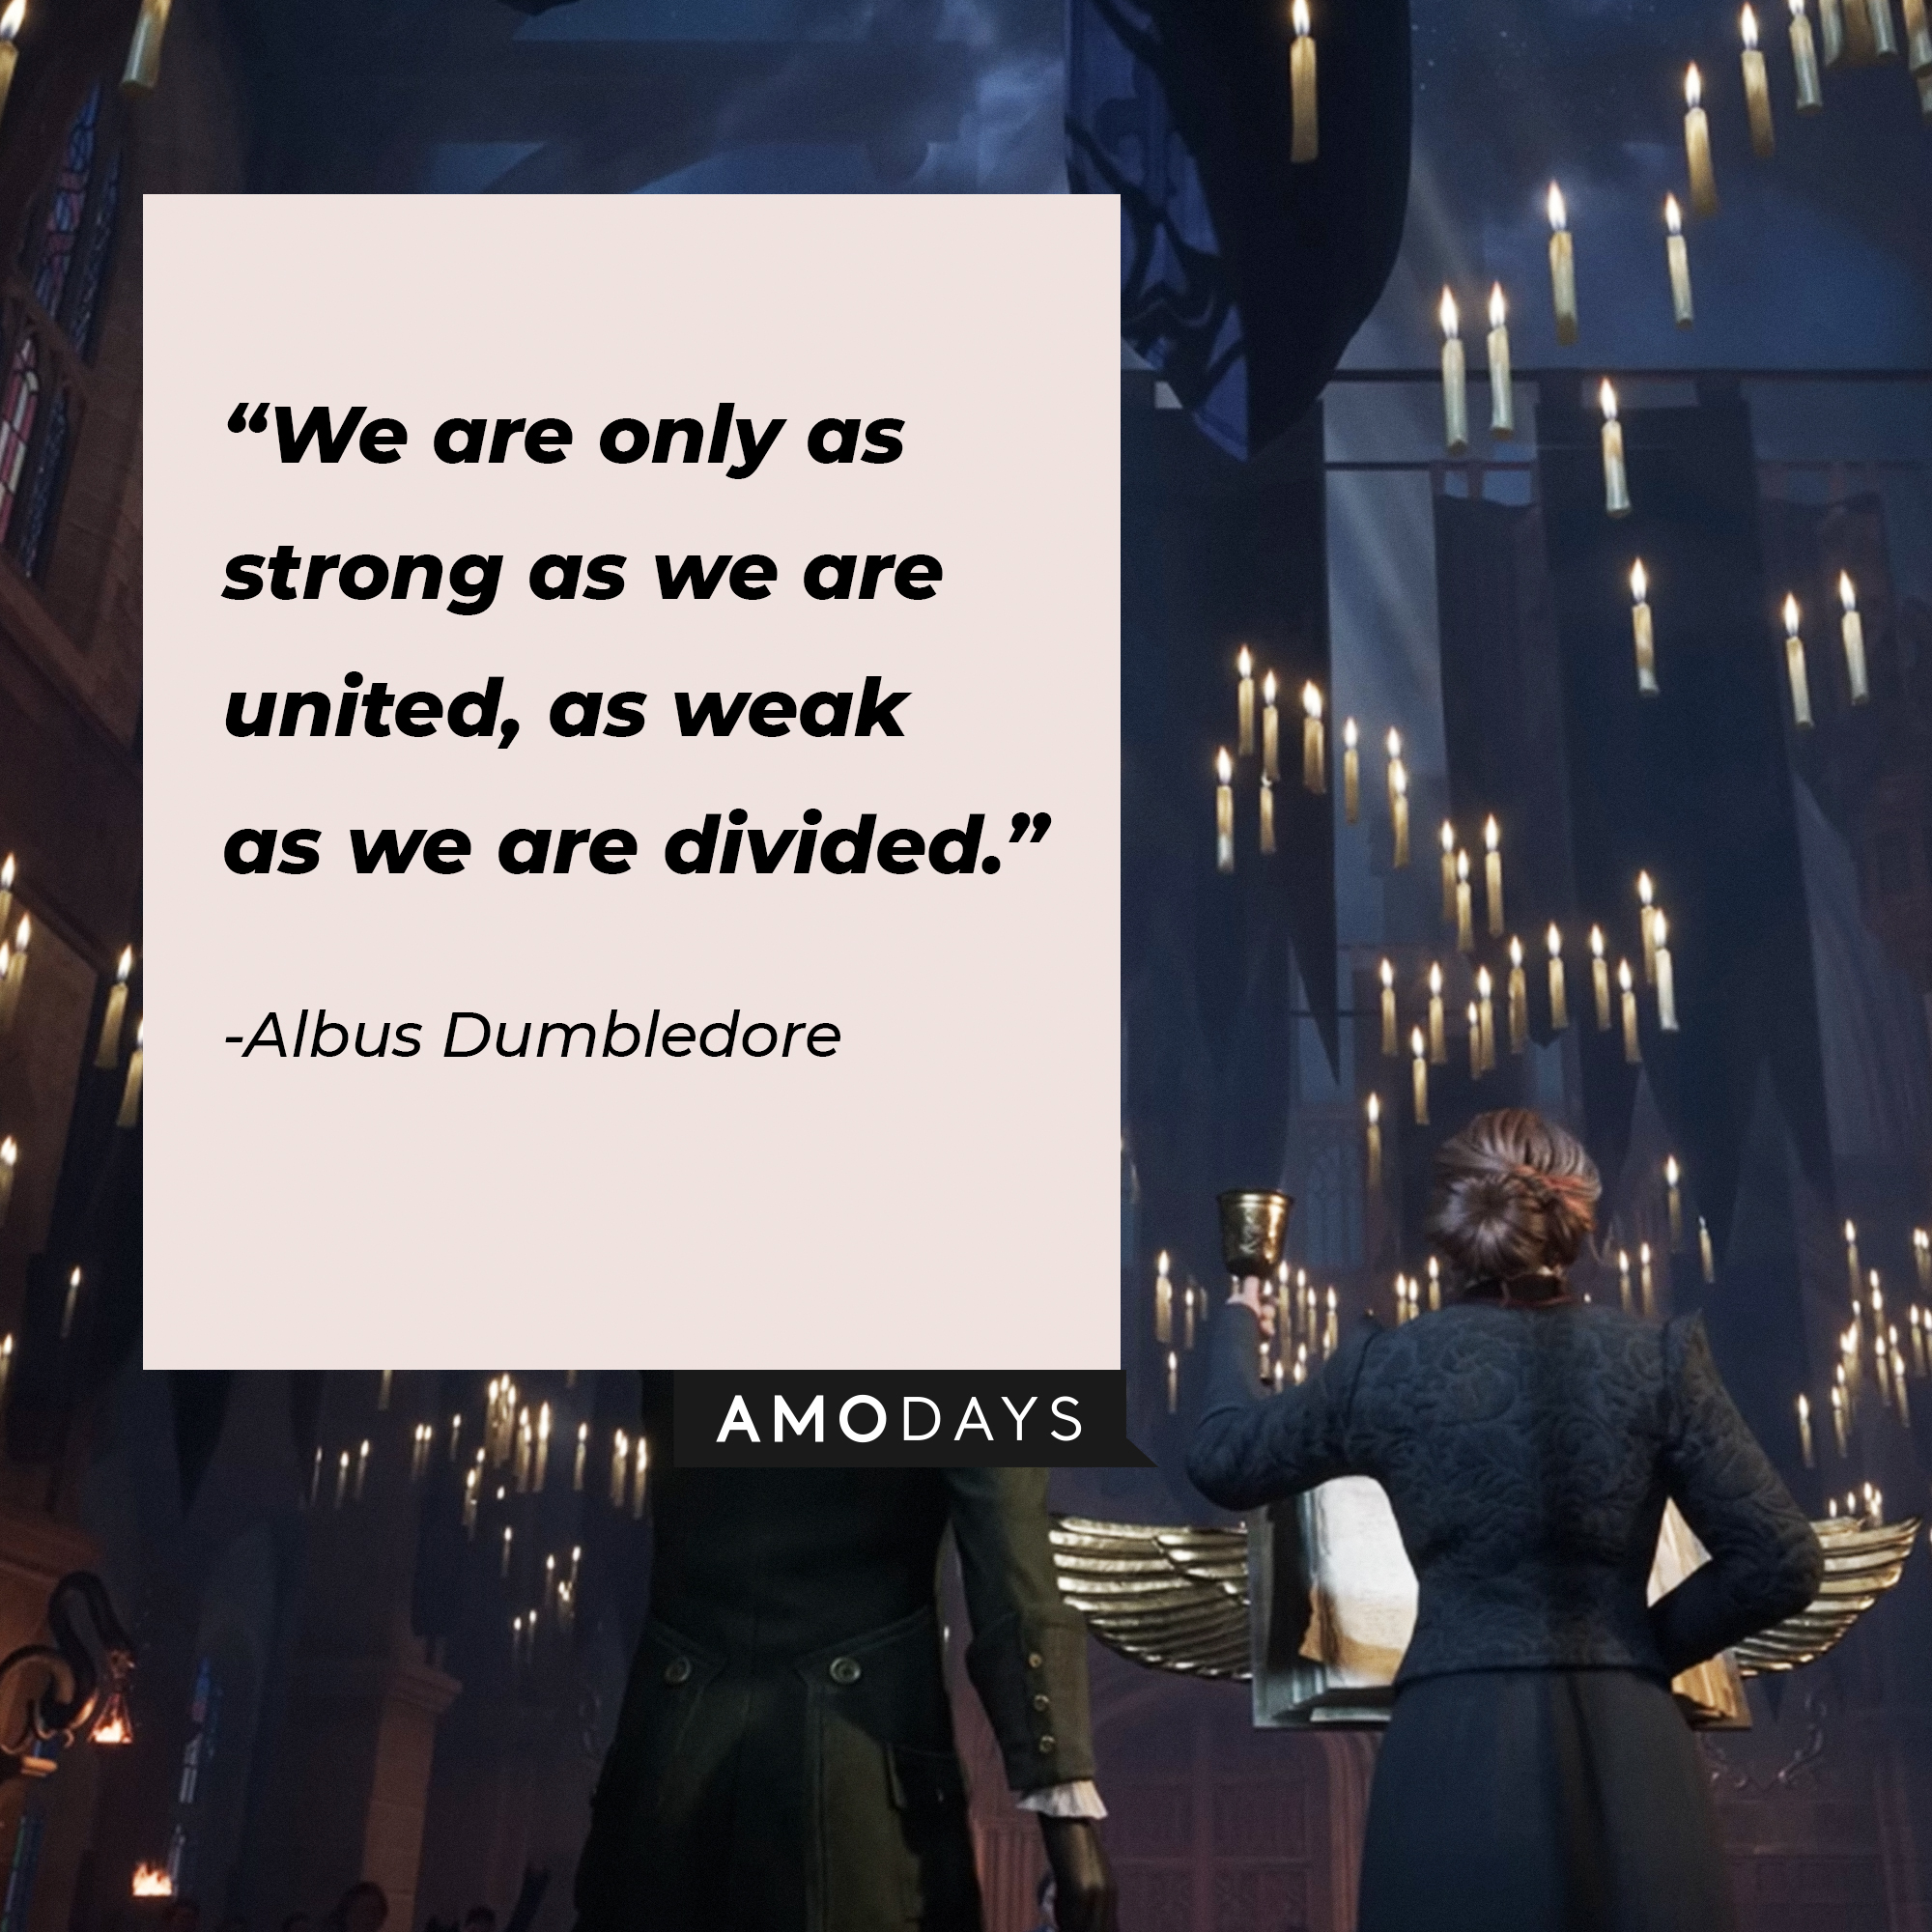 Albus Dumbledore's quote: "We are only as strong as we are united, as weak as we are divided." | Source: Youtube.com/HogwartsLegacy